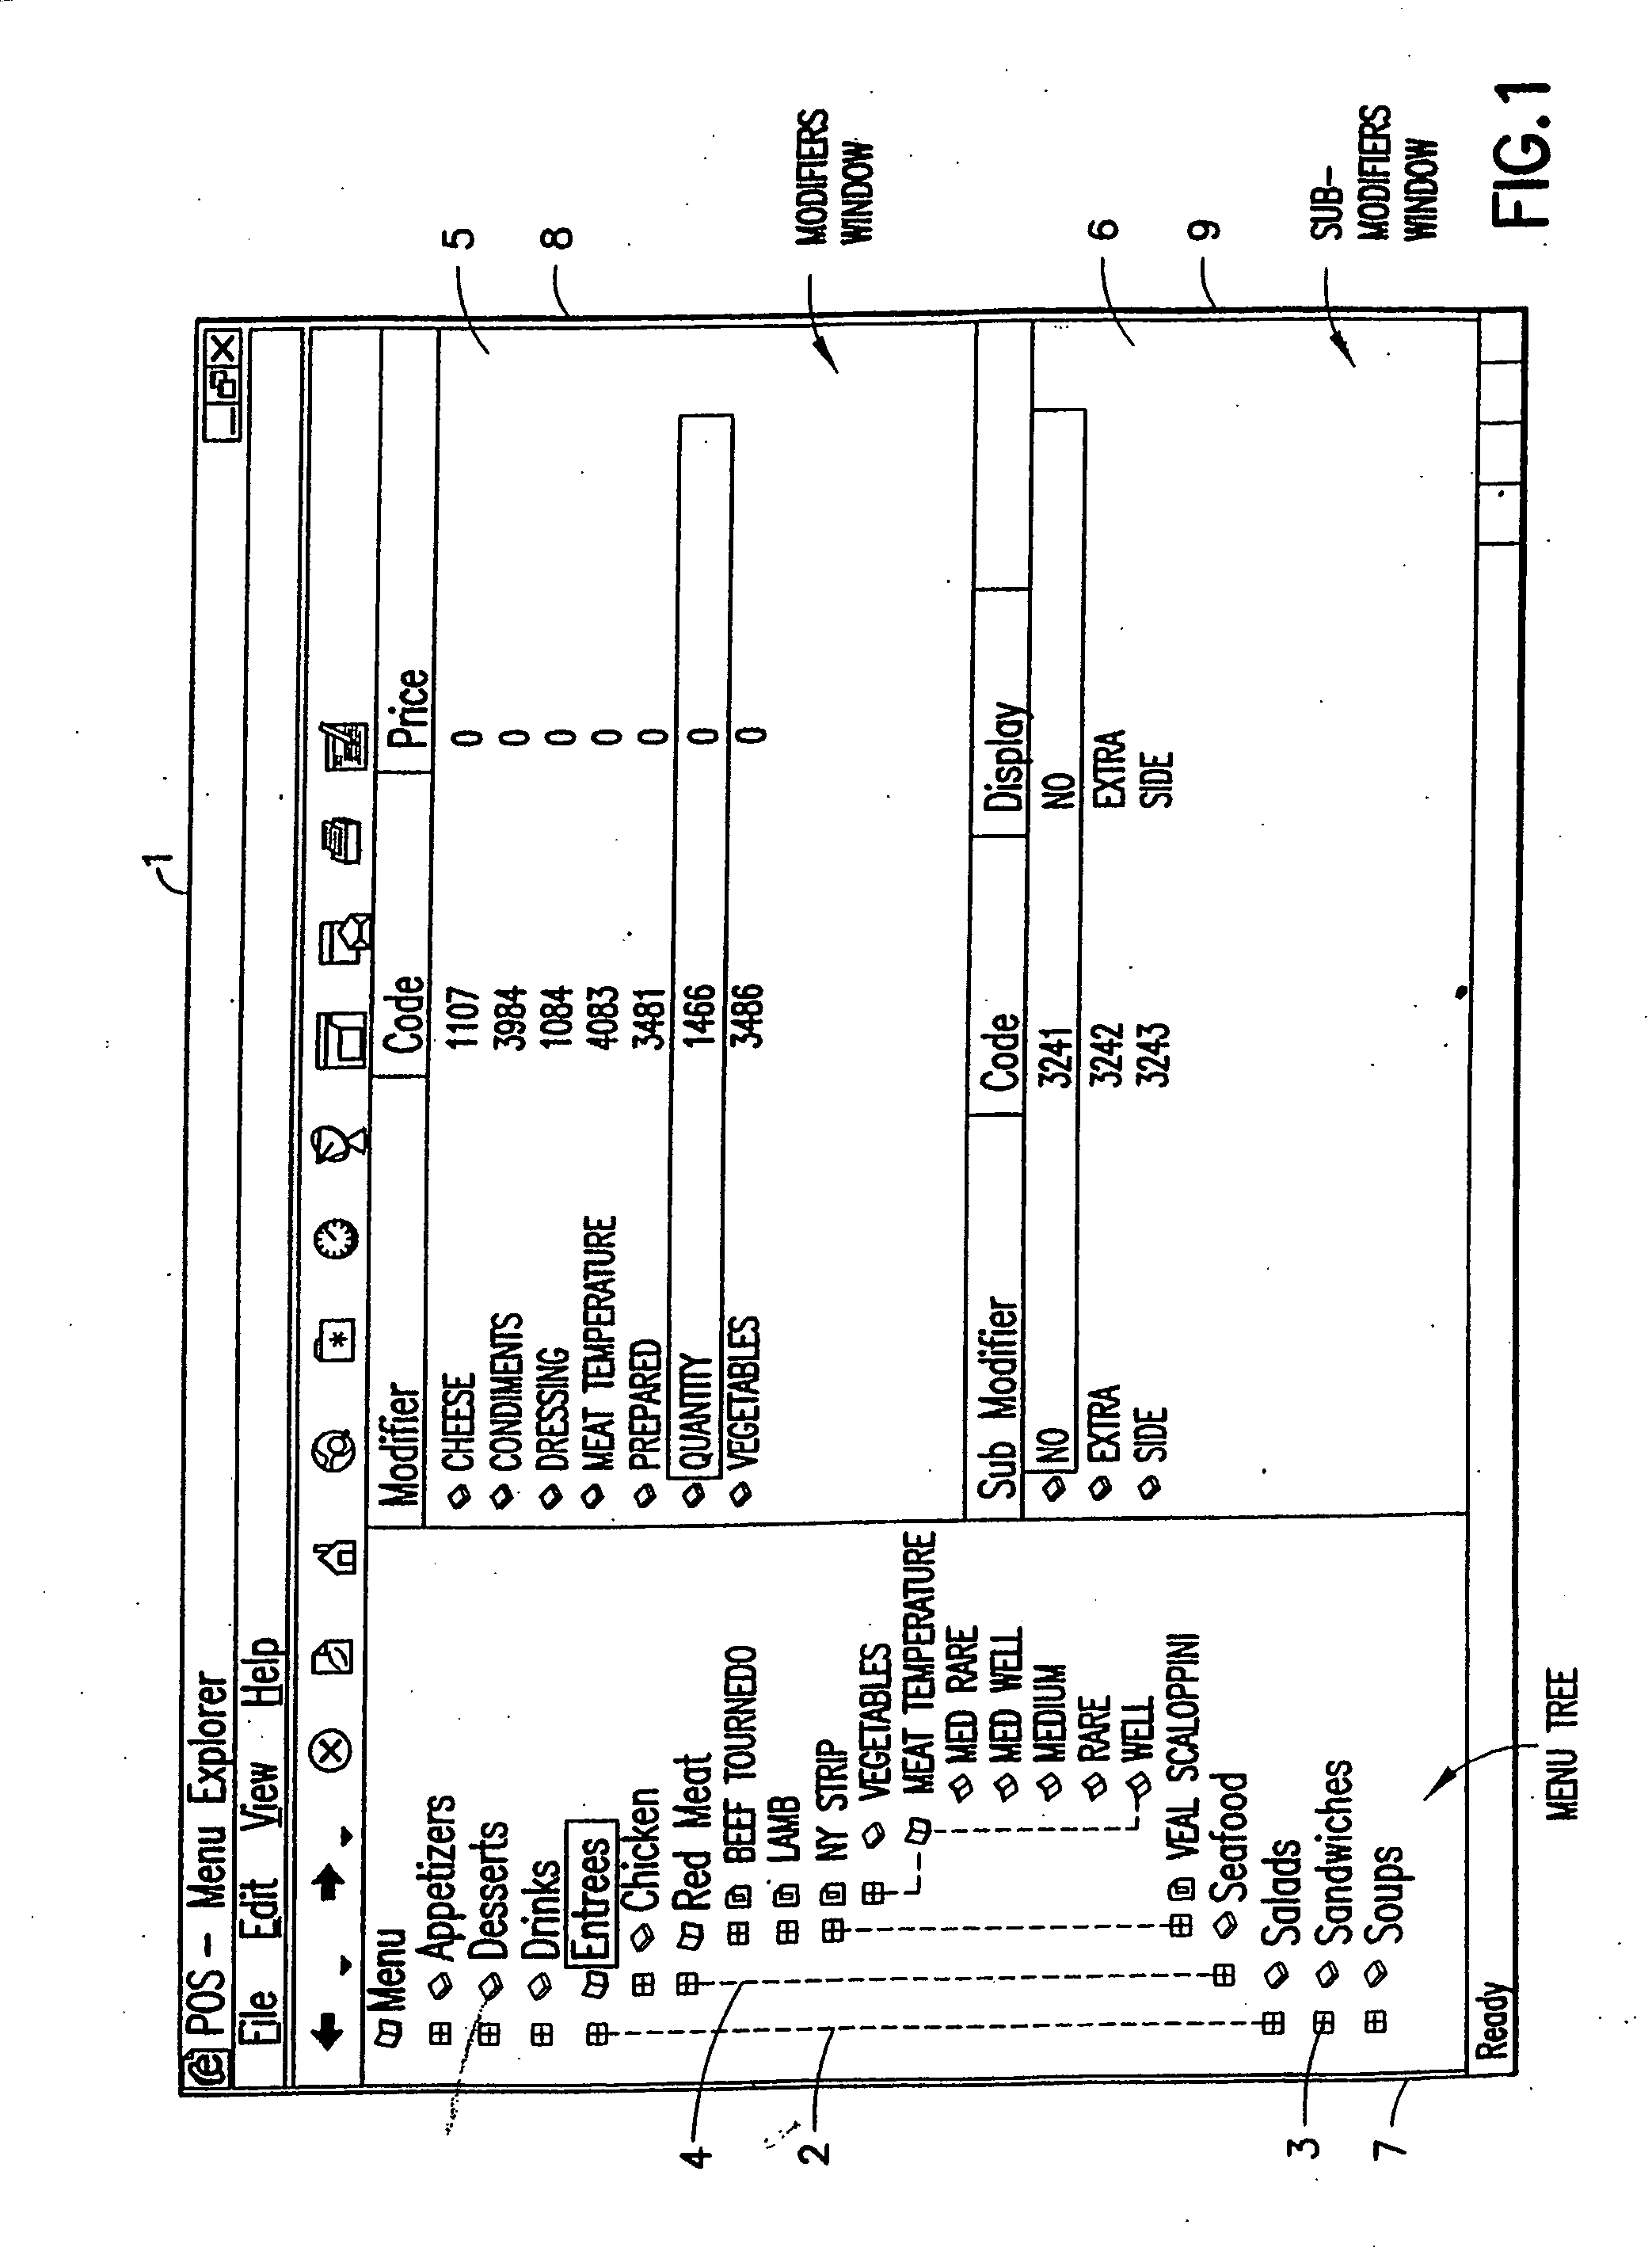 Information management and synchronous communications system